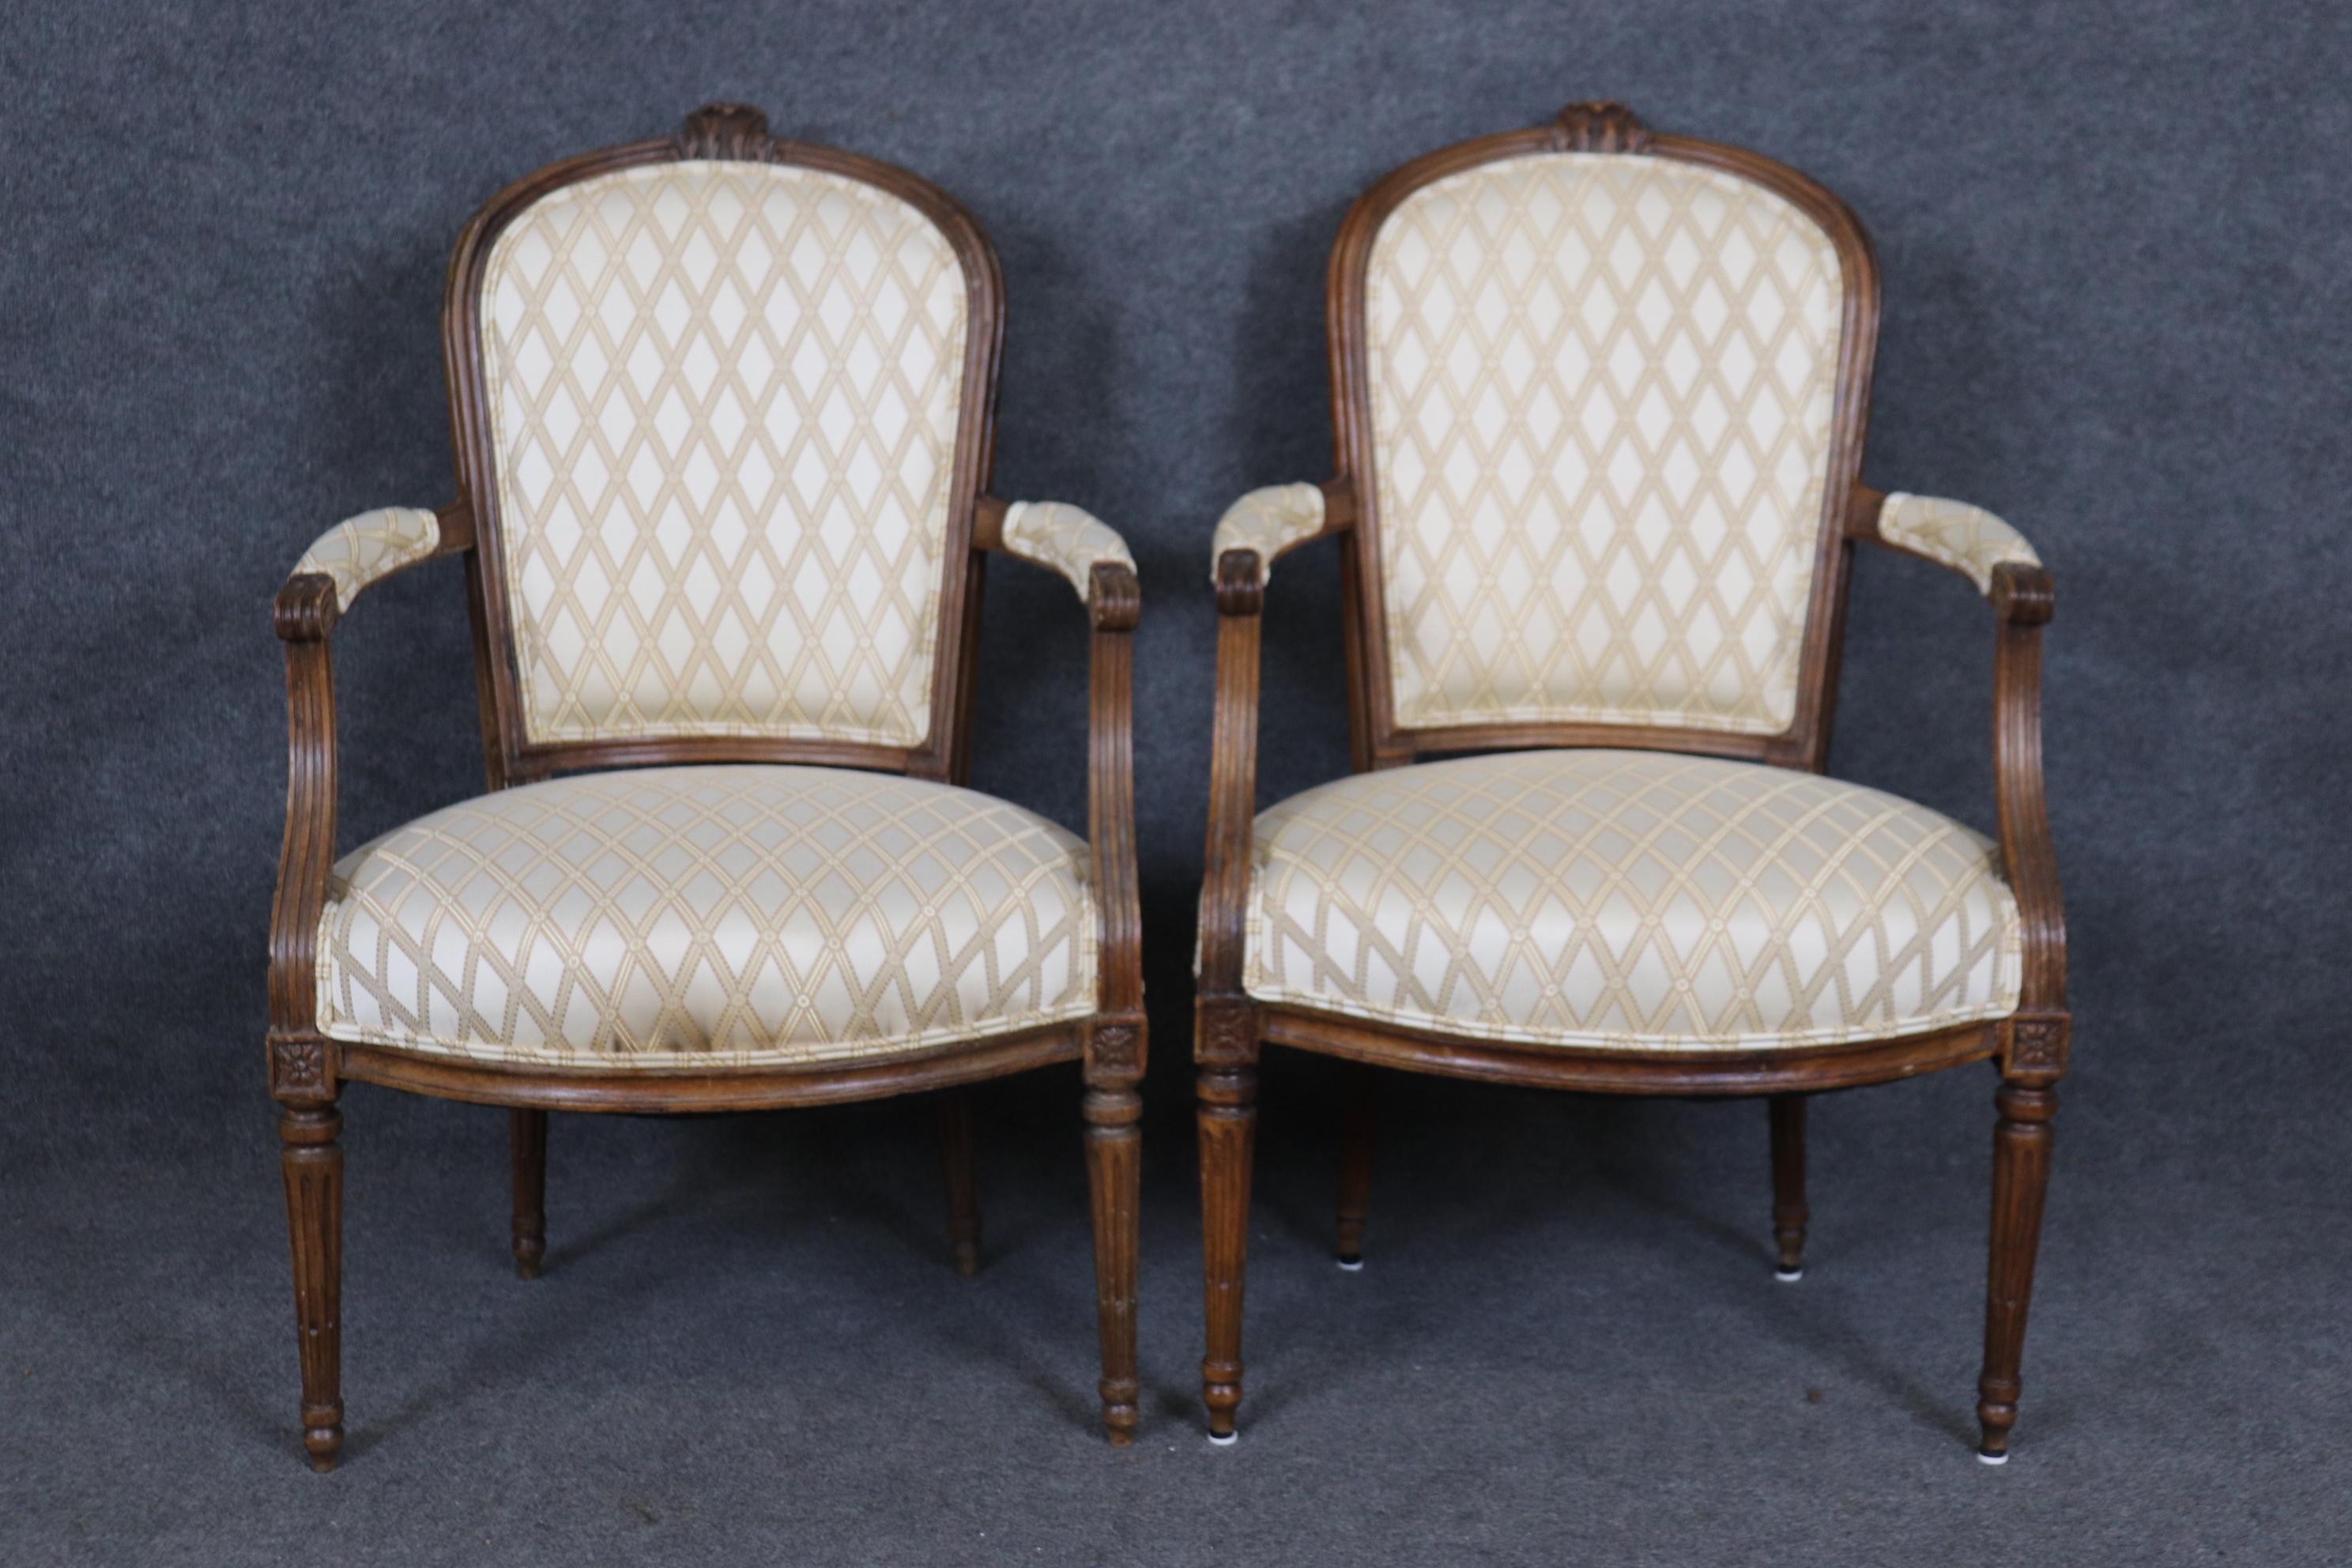 These are classic chairs and are in good condition. The chairs have normal signs of wear and use. They have nice older upholstery and may have signs of use including minor staining not shown in photos. Measures 37.25 tall x 24 wide x 25 deep and